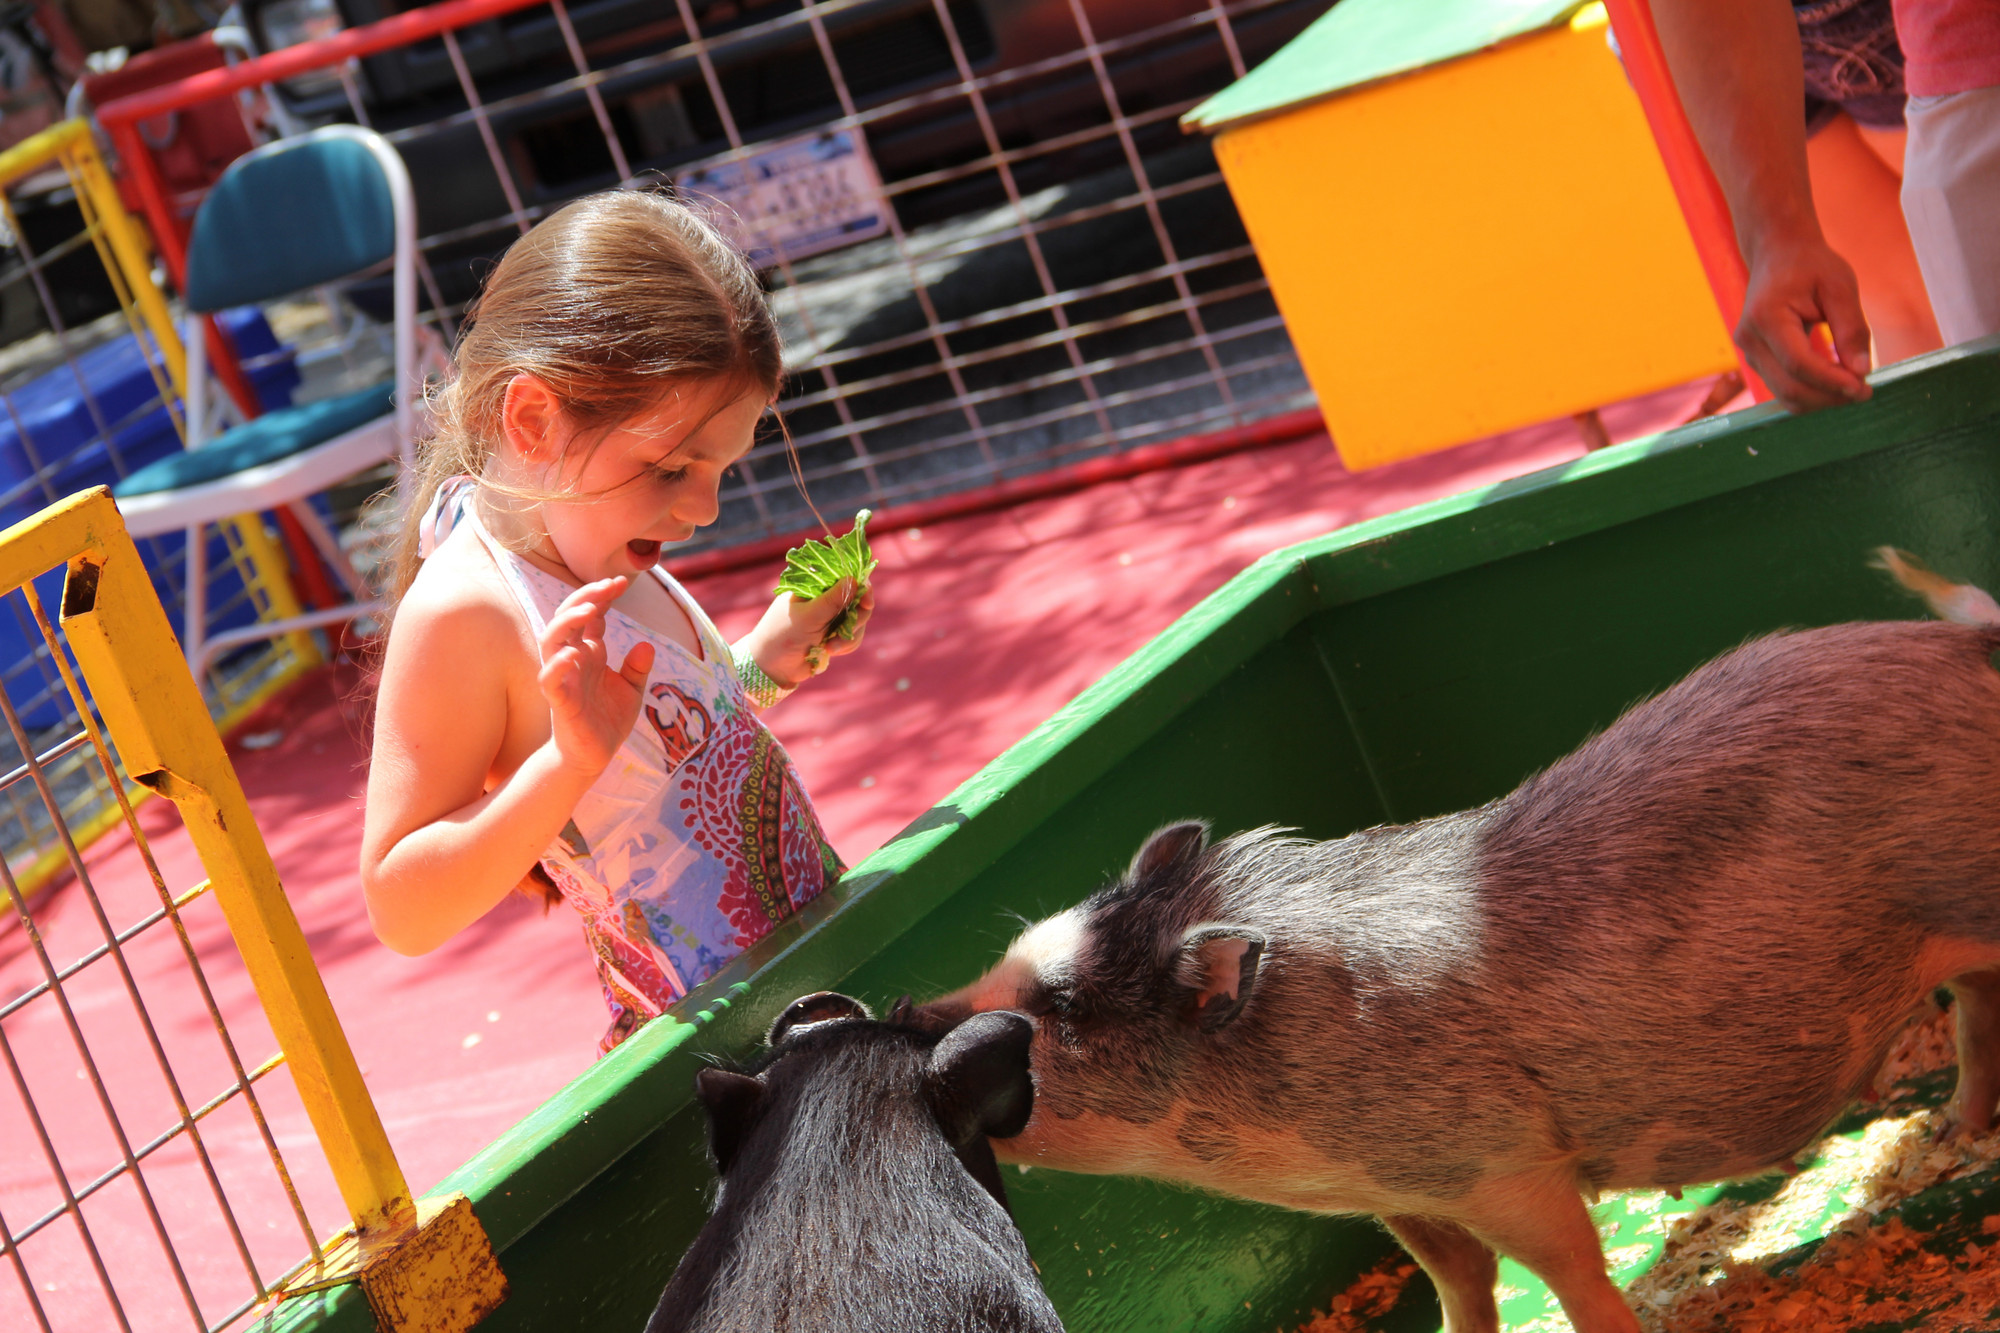 Isabella Rainone fed the pigs lettuce at the petting zoo while trying not to get her fingers nipped.